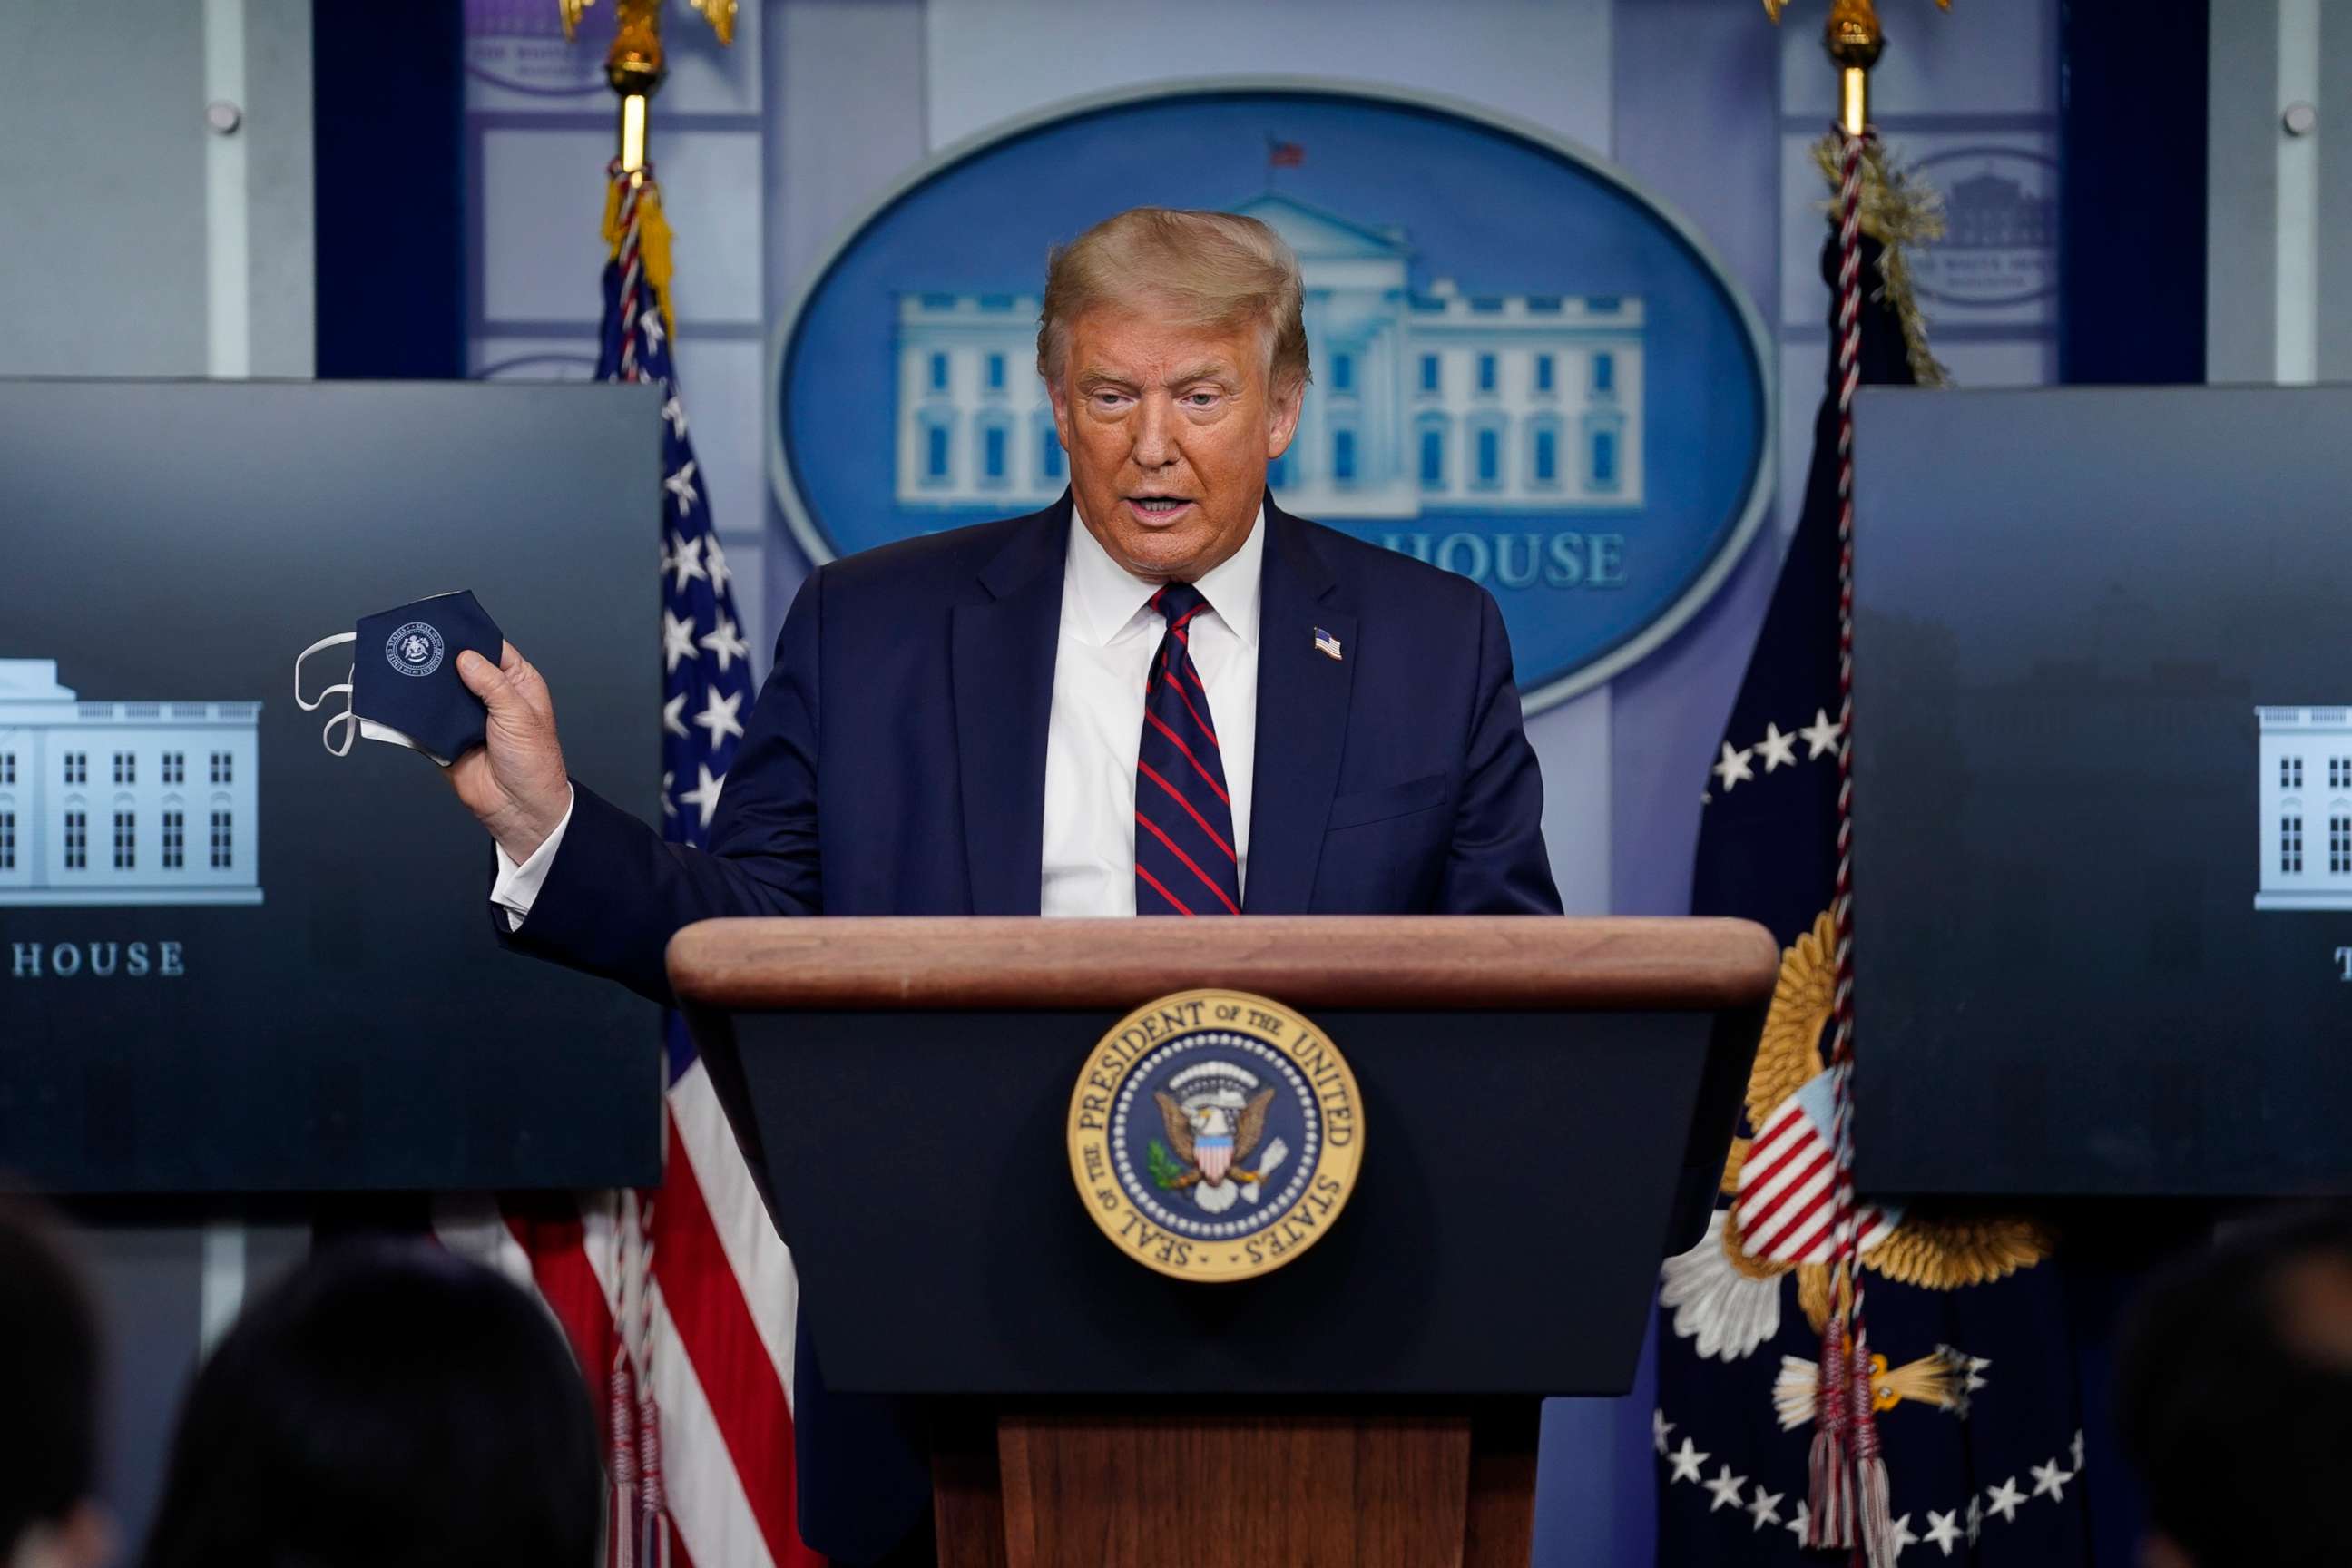 PHOTO: President Donald Trump holds a face mask as he speaks during a news conference at the White House, July 21, 2020.